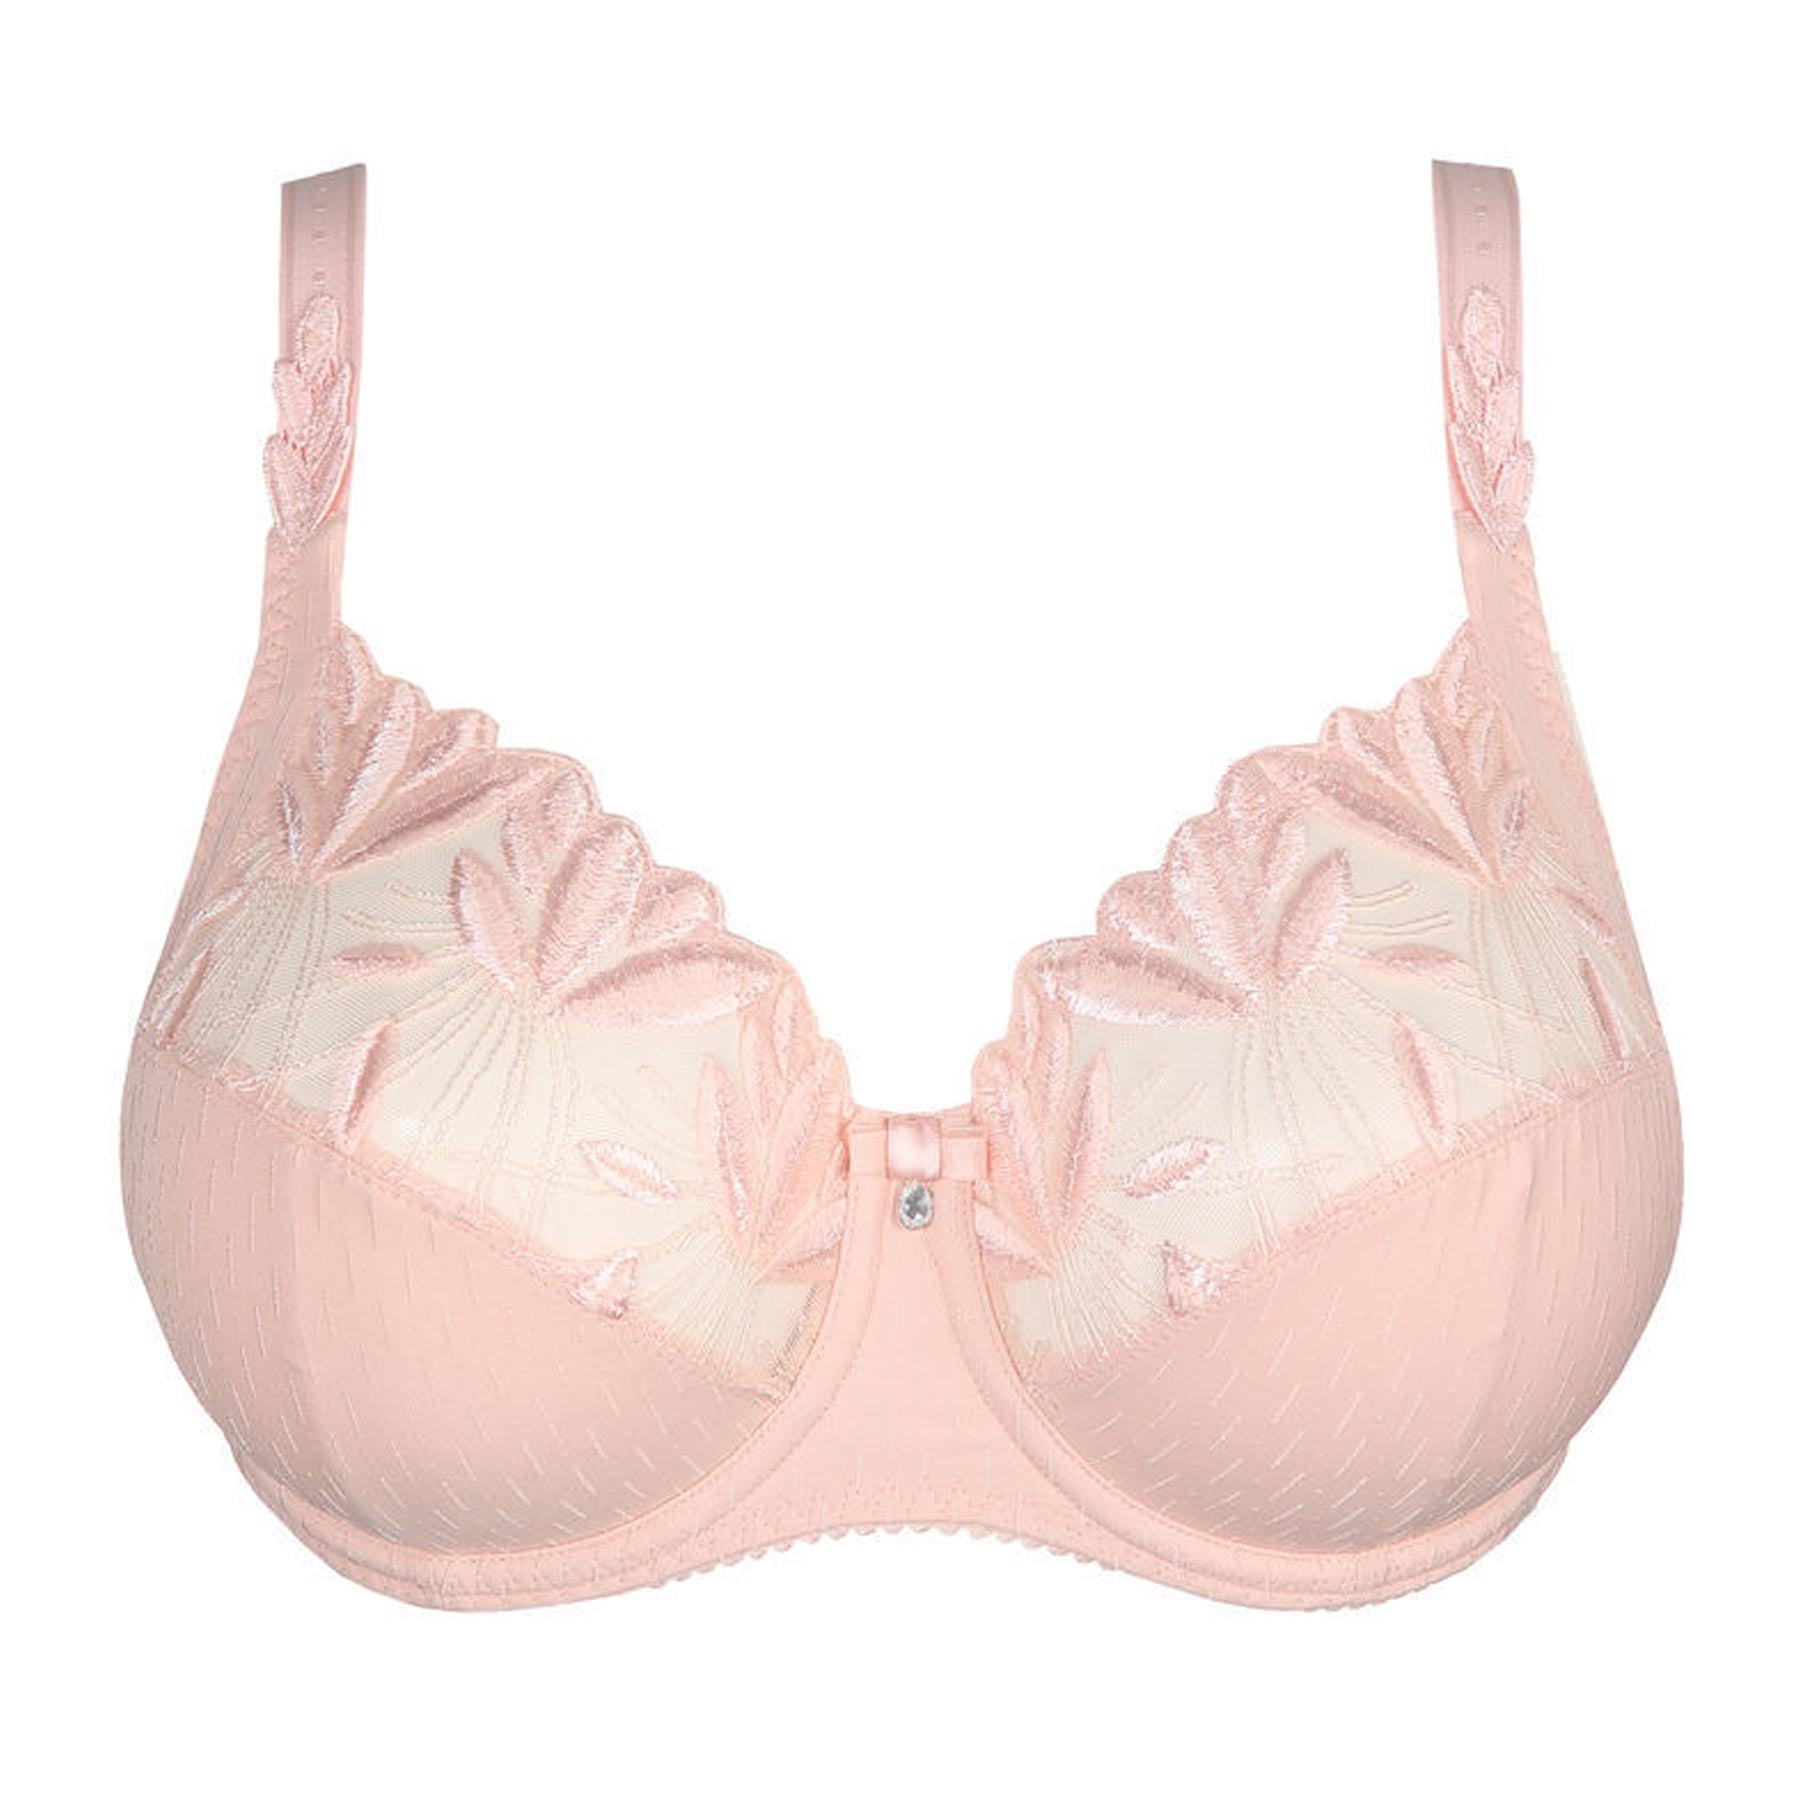 Lascana Padrona push up Bra in Coral with front panel size 32 - 38 C - DD  Cup